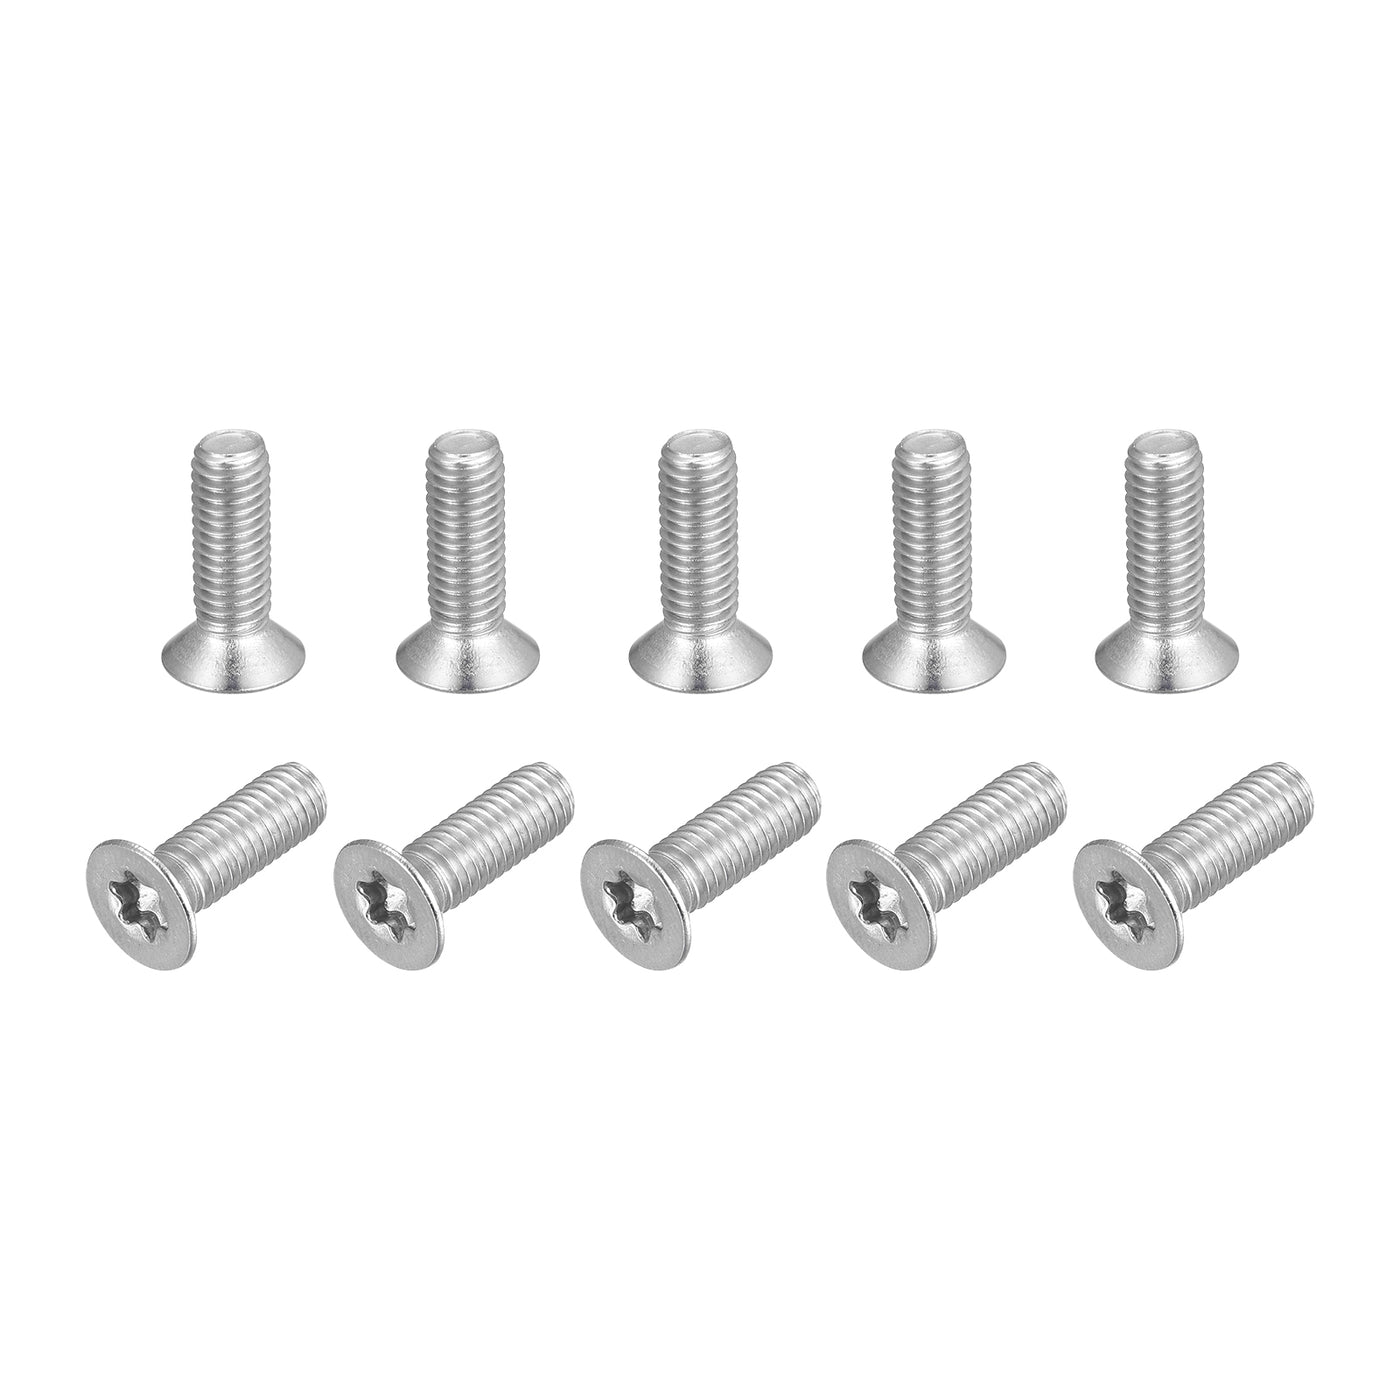 uxcell Uxcell M5x16mm Torx Security Screws, 20pcs 316 Stainless Steel Countersunk Head Screw